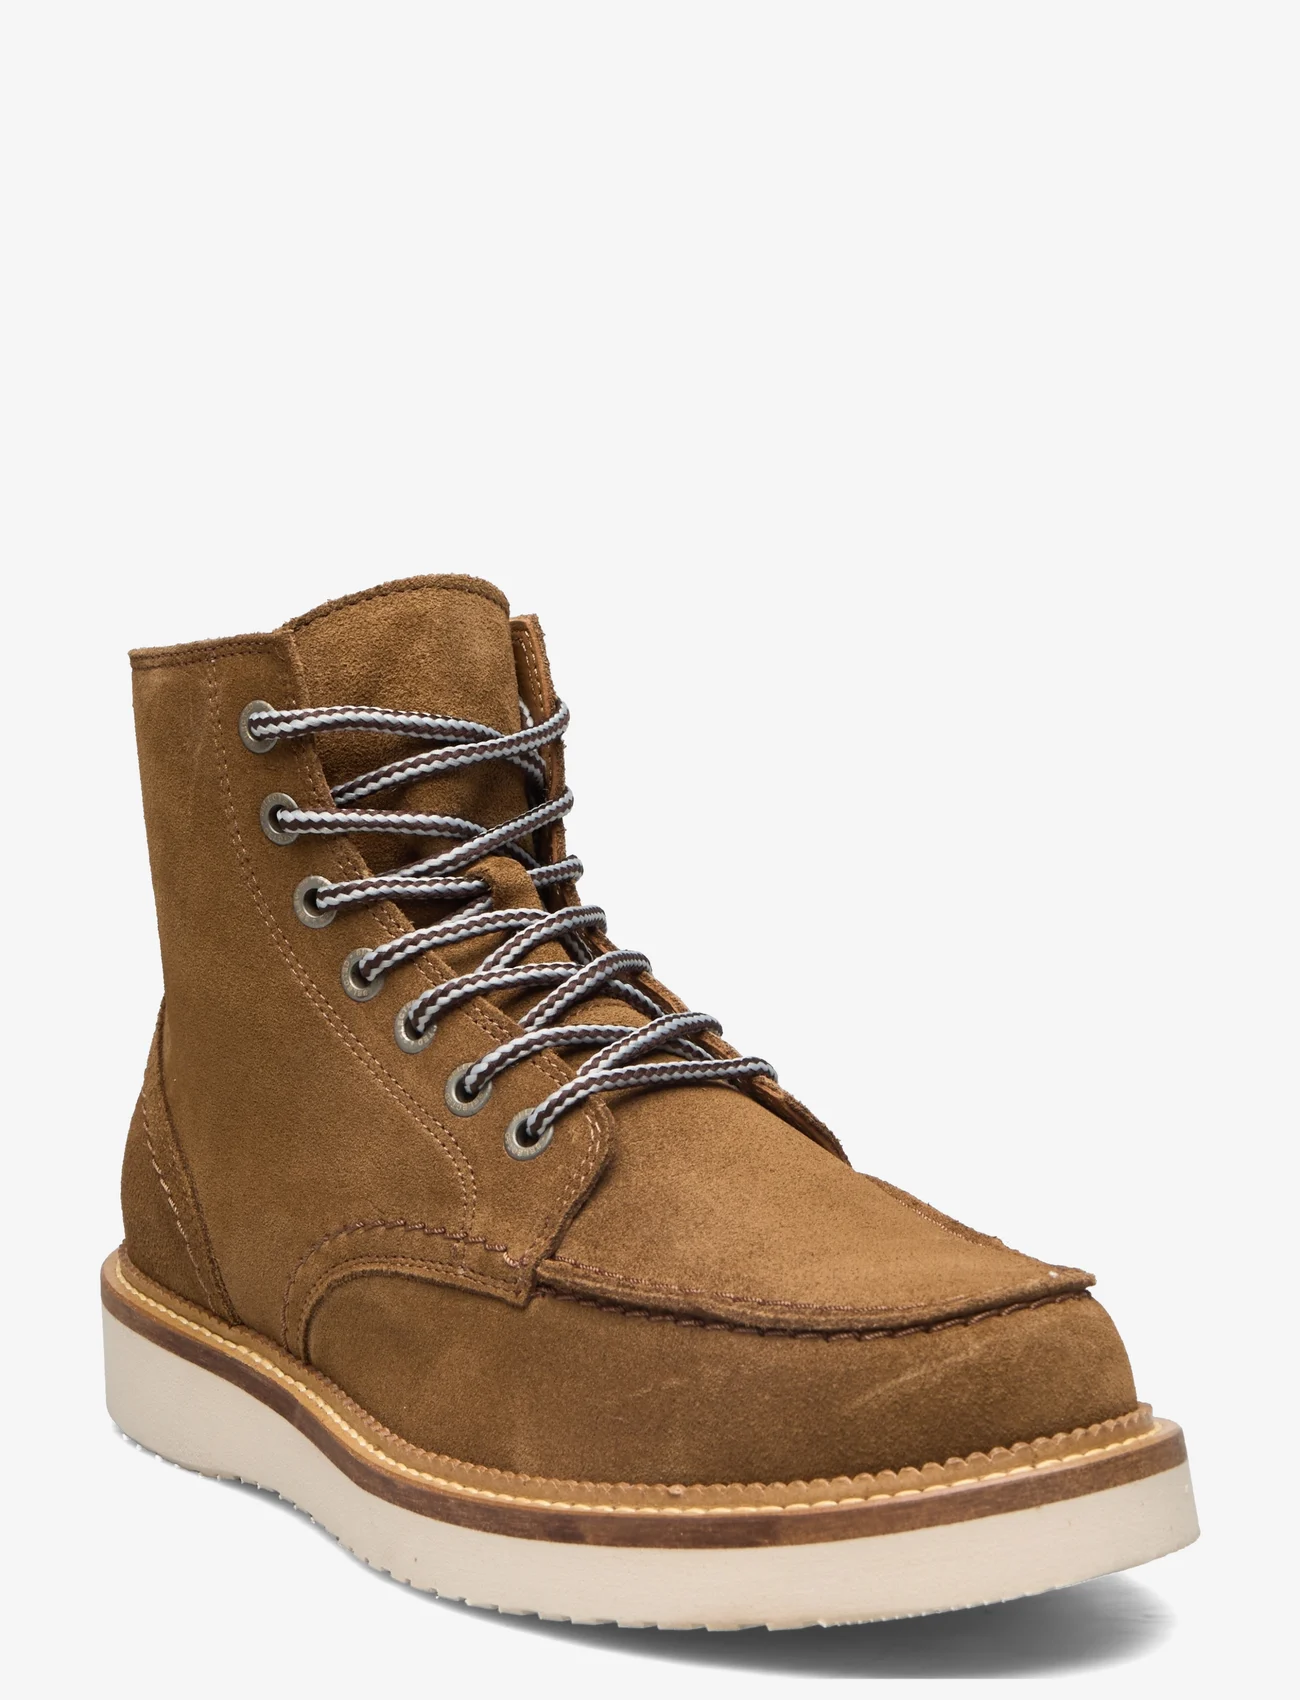 Selected Homme - SLHTEO NEW SUEDE MOC-TOE BOOT B - sznurowane - tobacco brown - 0